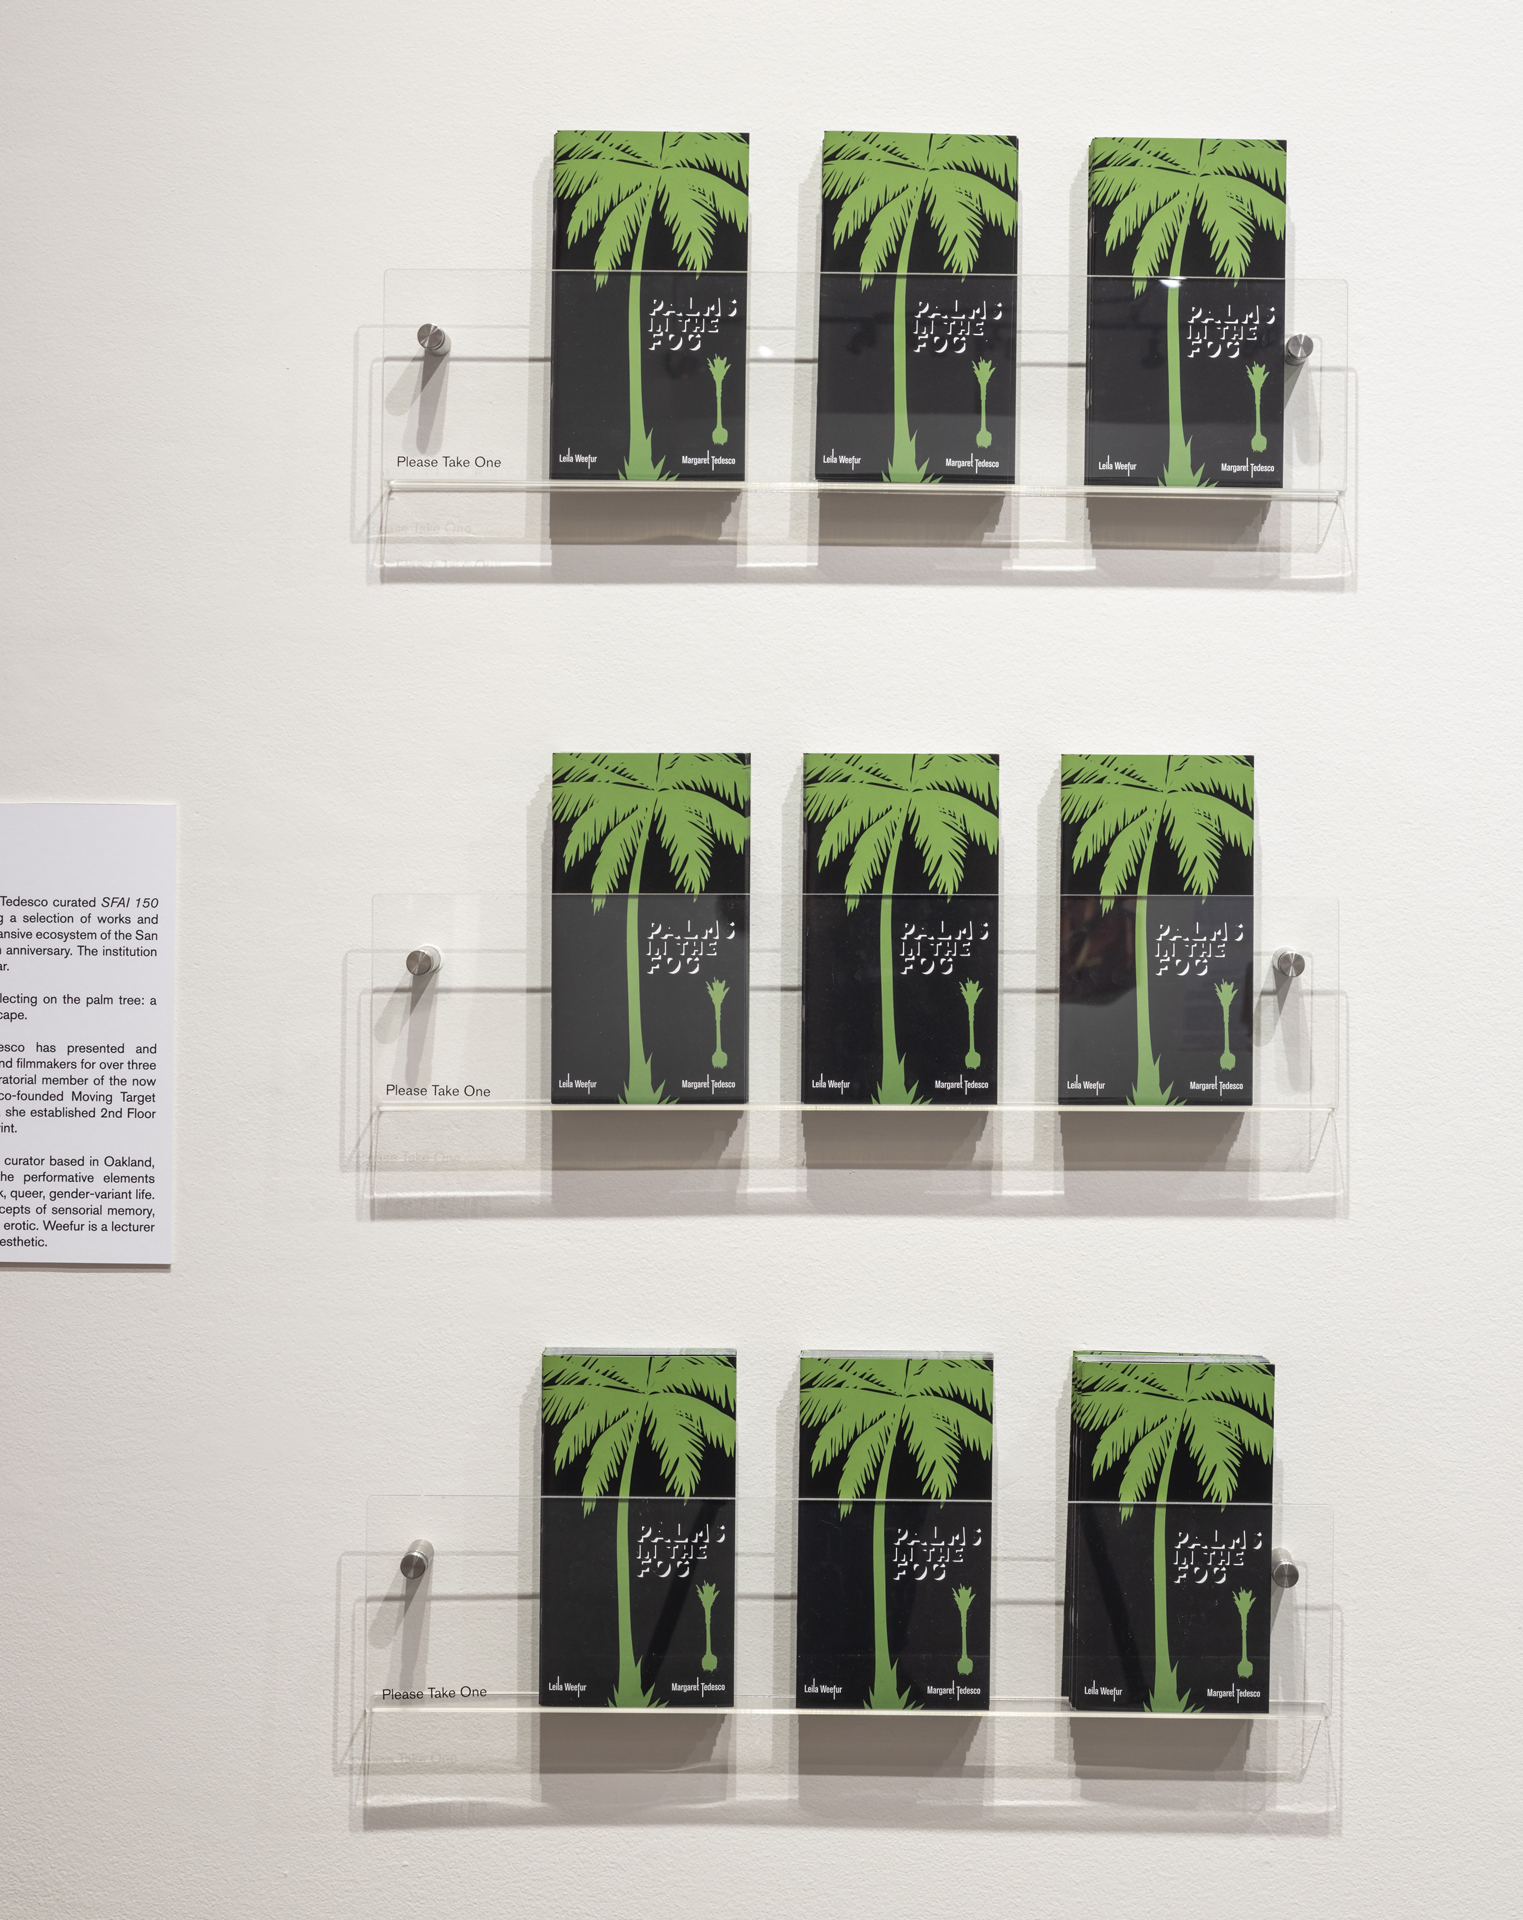 Three rows of three magazines with a green palm tree and black background hanging on the wall